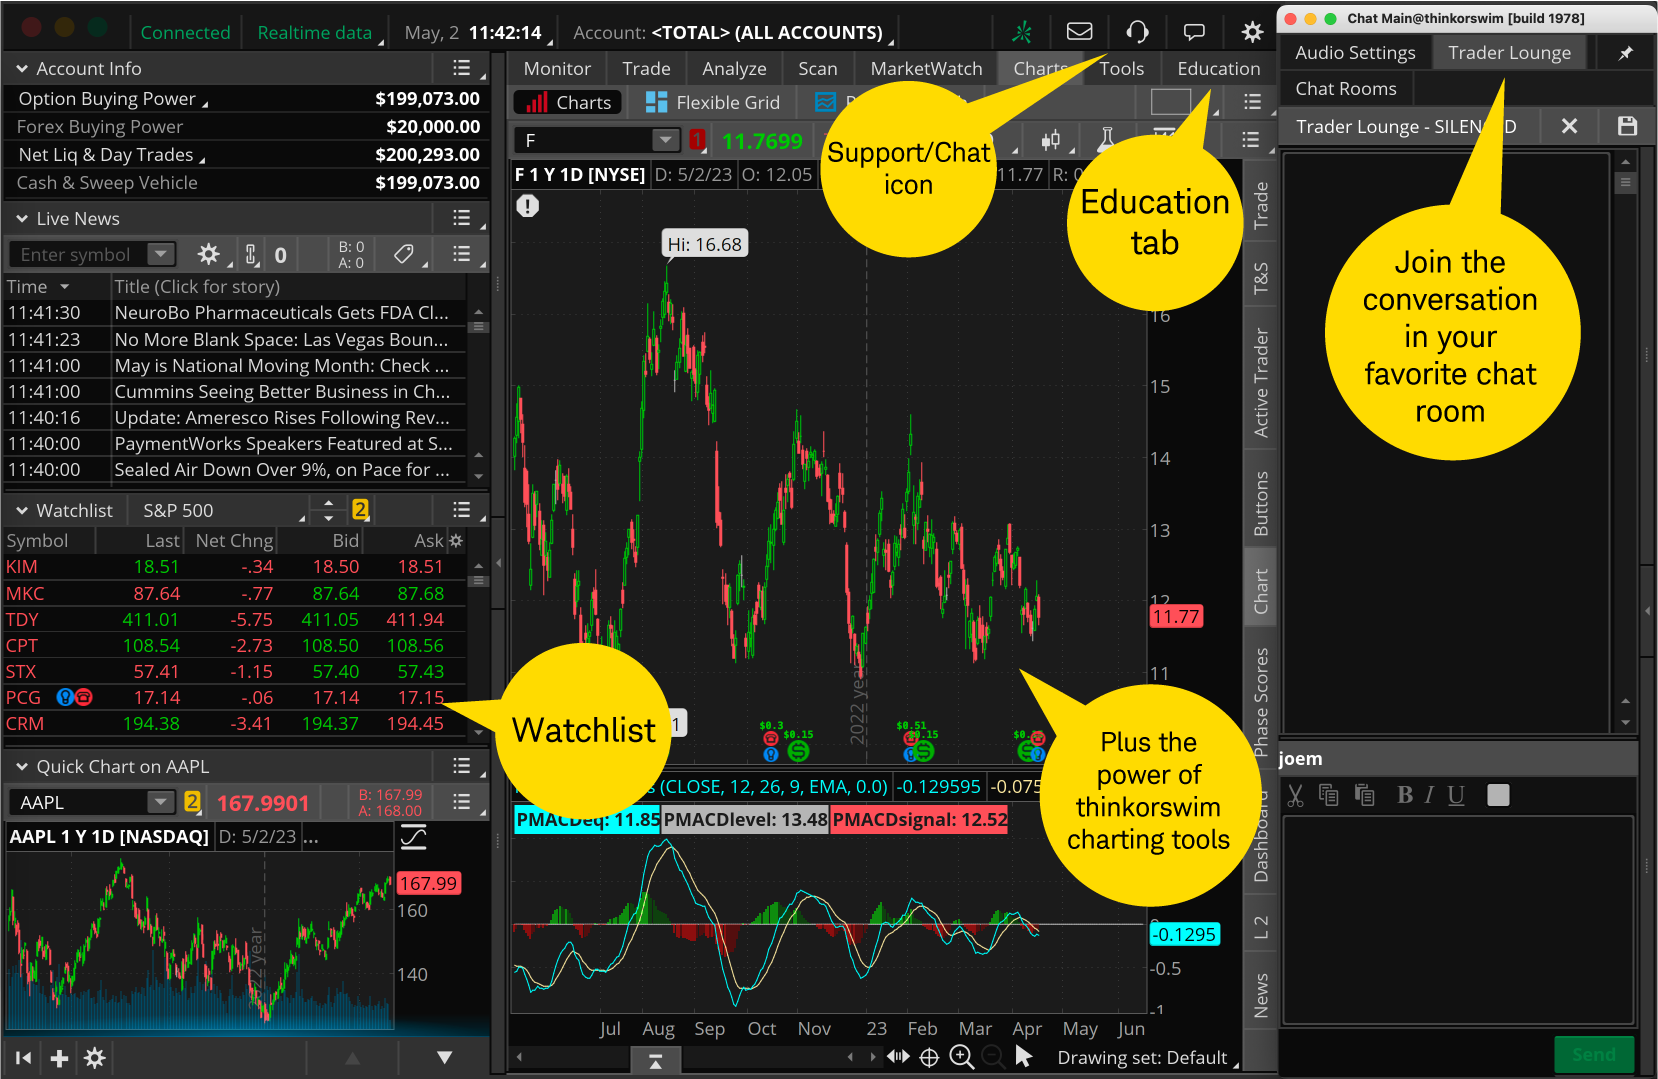 Image shows a sample of a thinkorswim setup. It highlights various features and tabs, watchlists, charting tools, the Education tab, and Chat Rooms, and where to chat with thinkorswim specialists. 